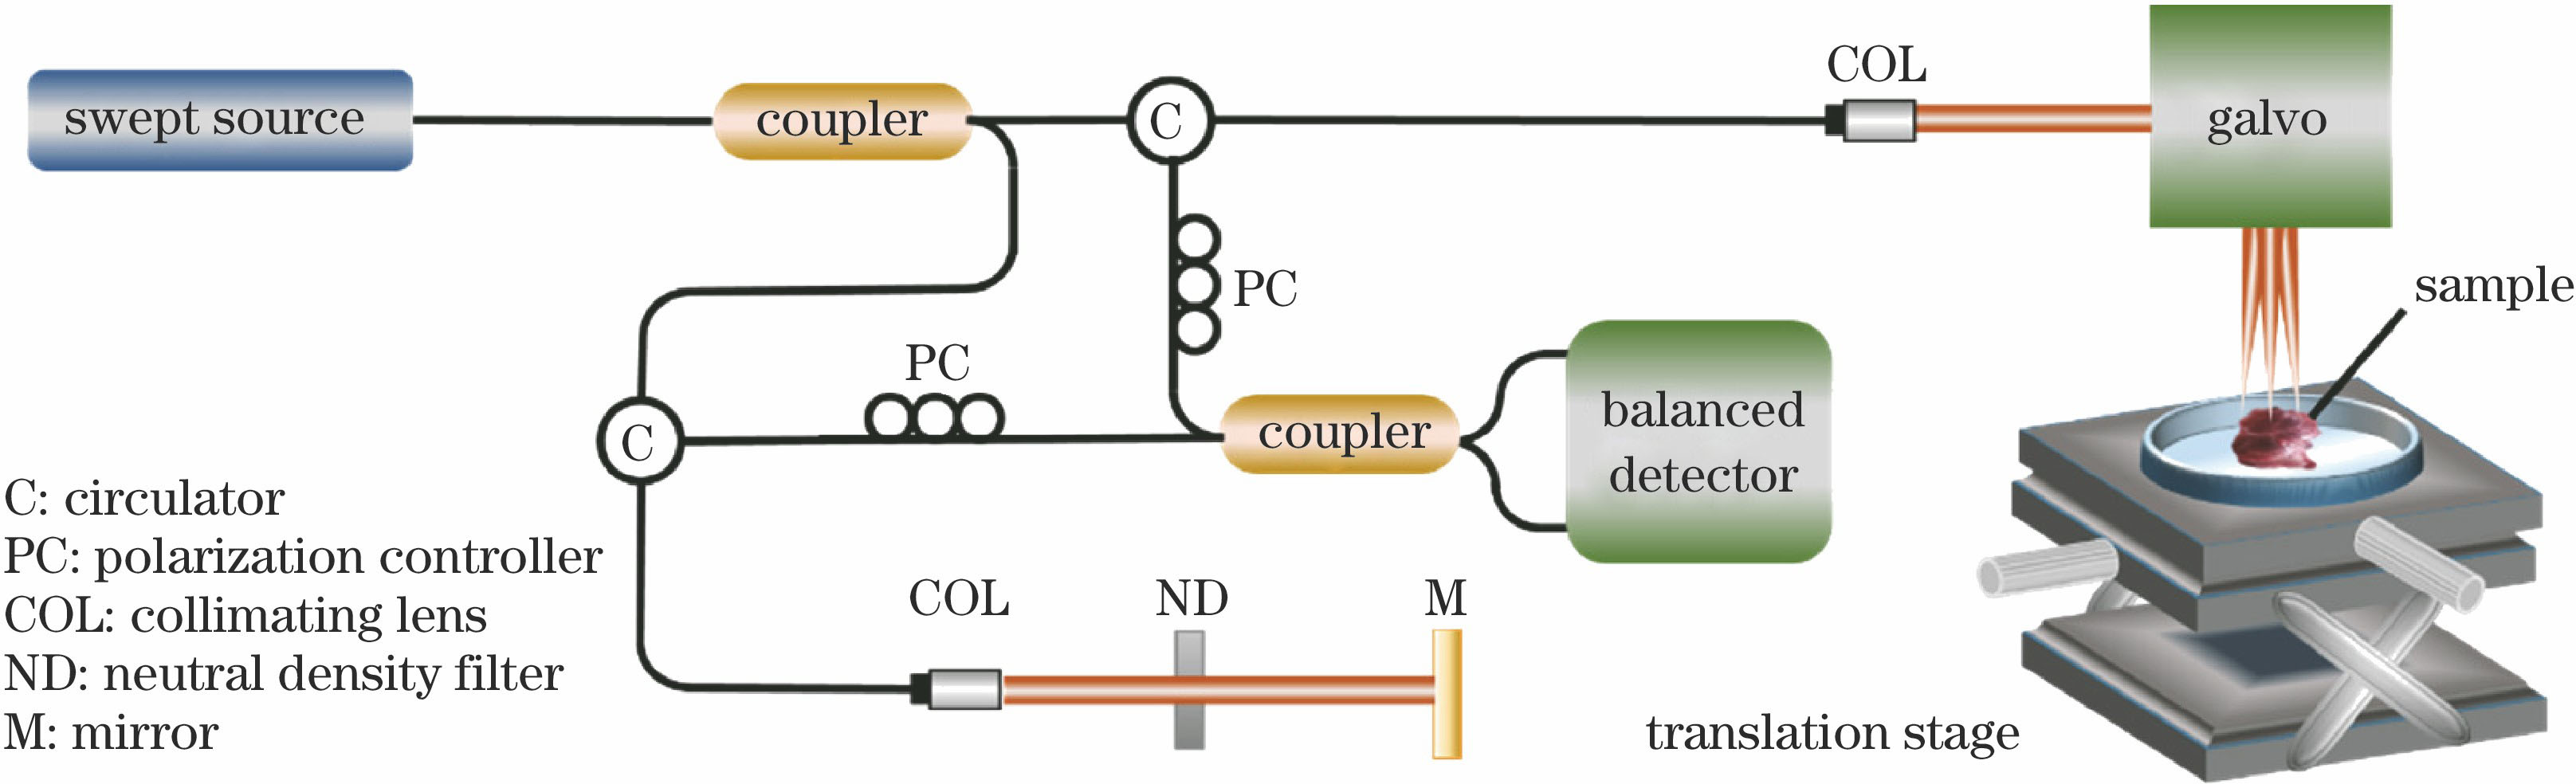 Schematic of SS-OCT system